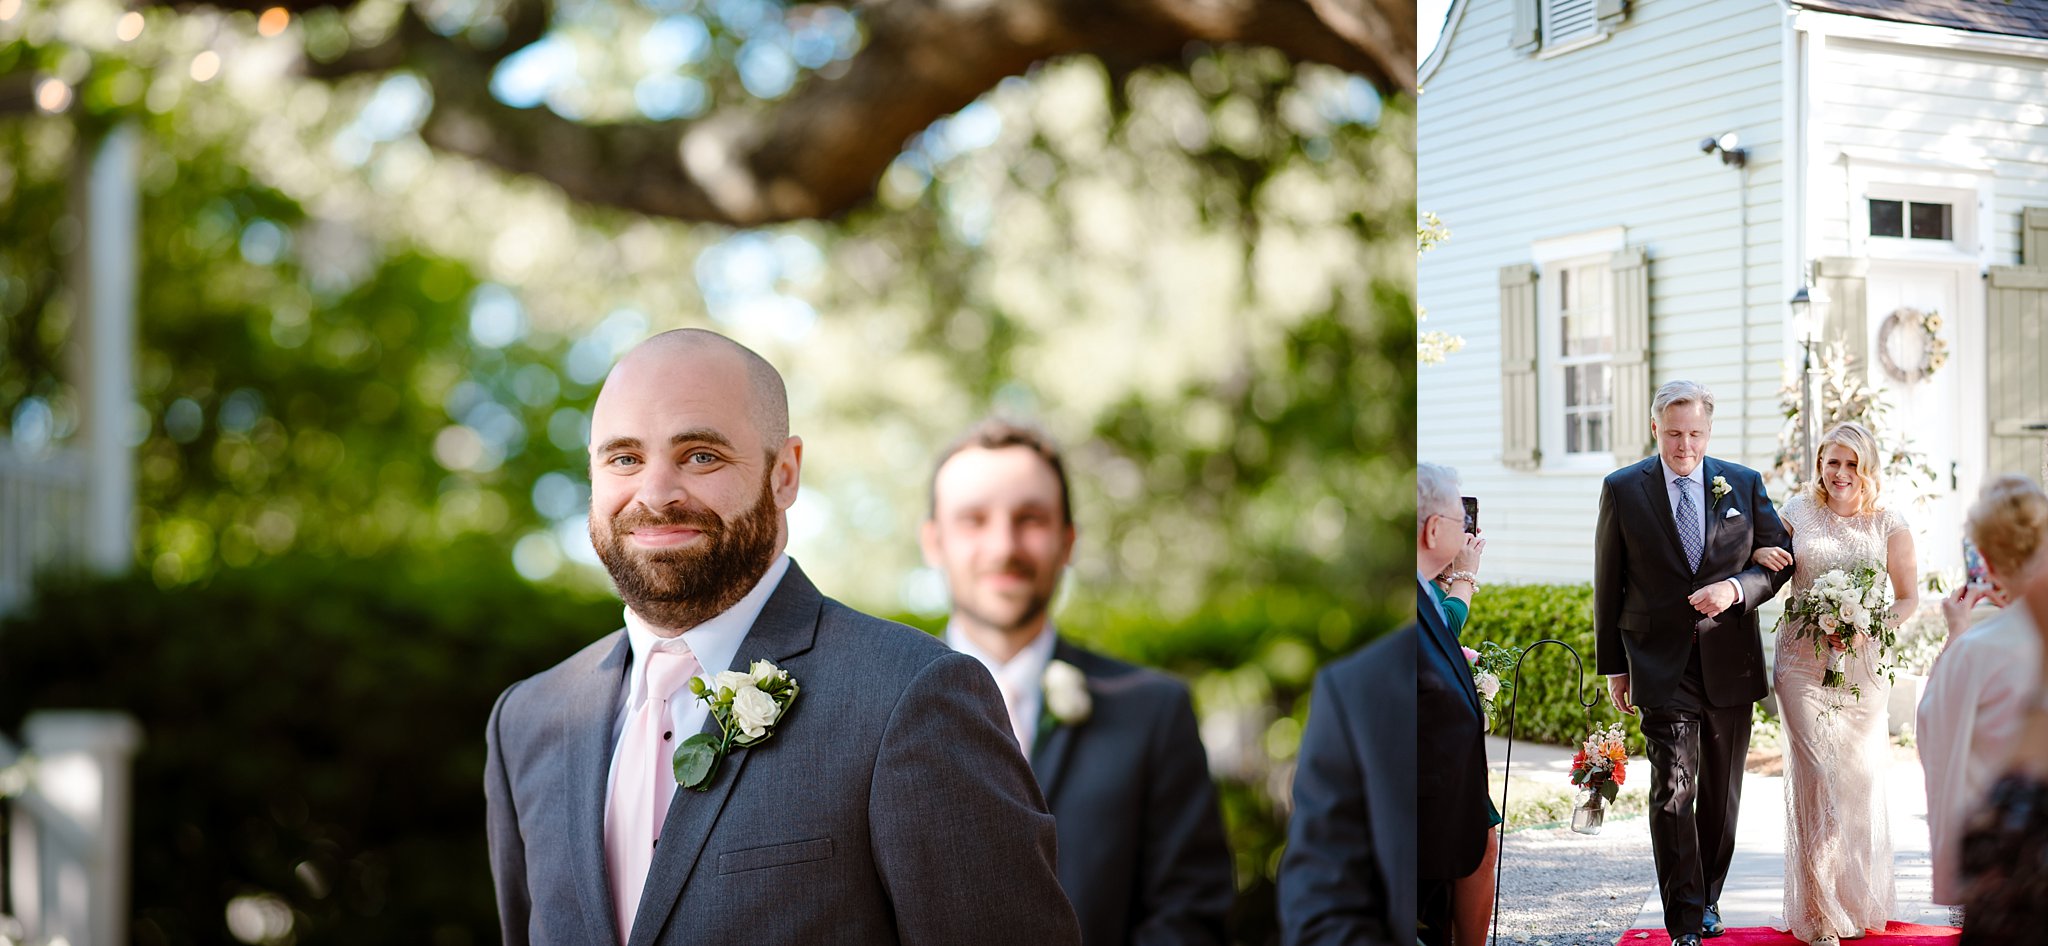 Vintage New Orleans Wedding Photography at Compass Point